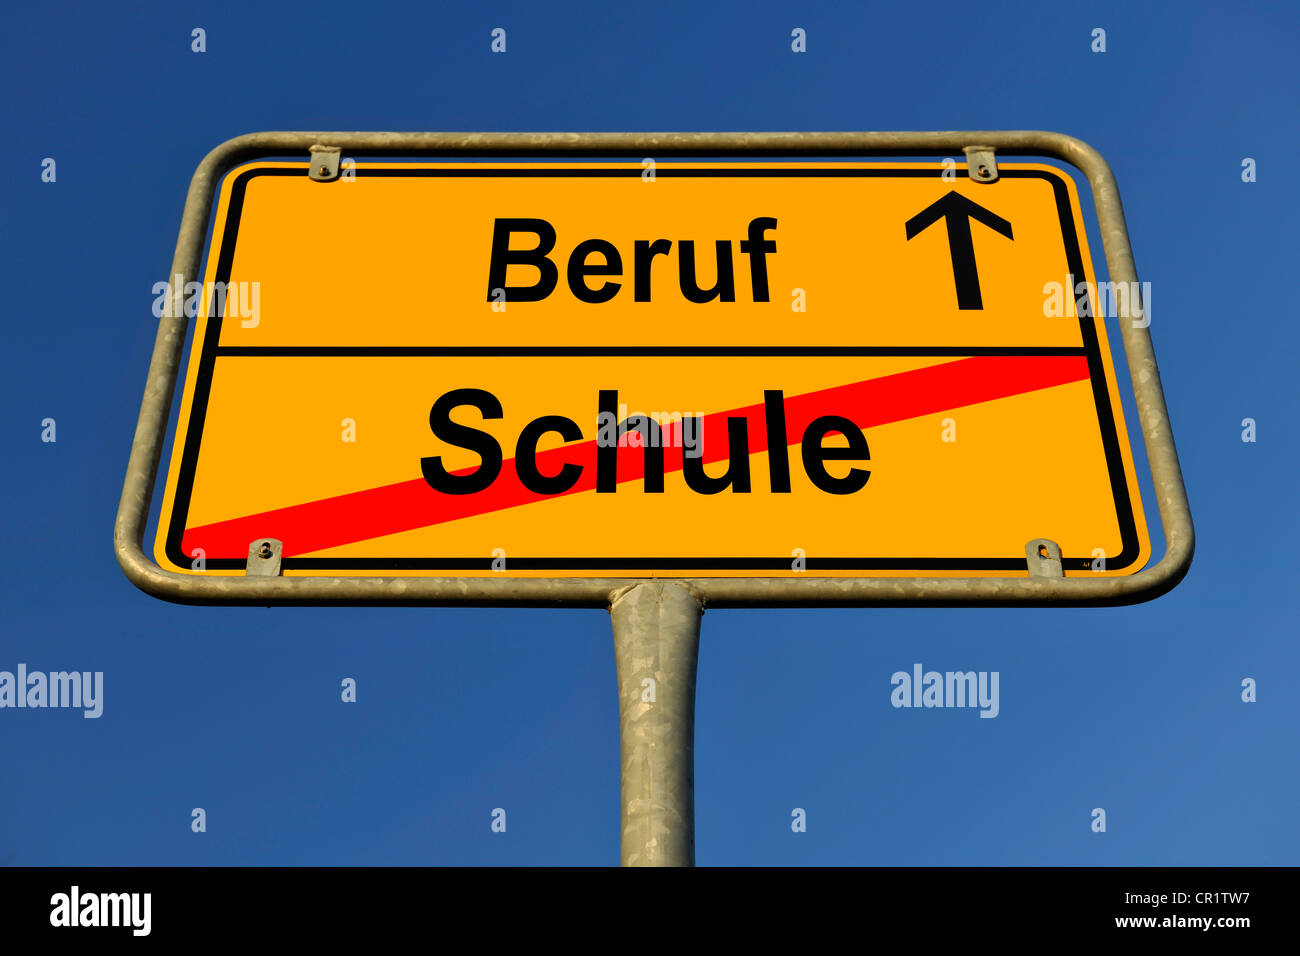 Sign, city limit, symbolic image for the transition from Schule or school to Beruf or work Stock Photo